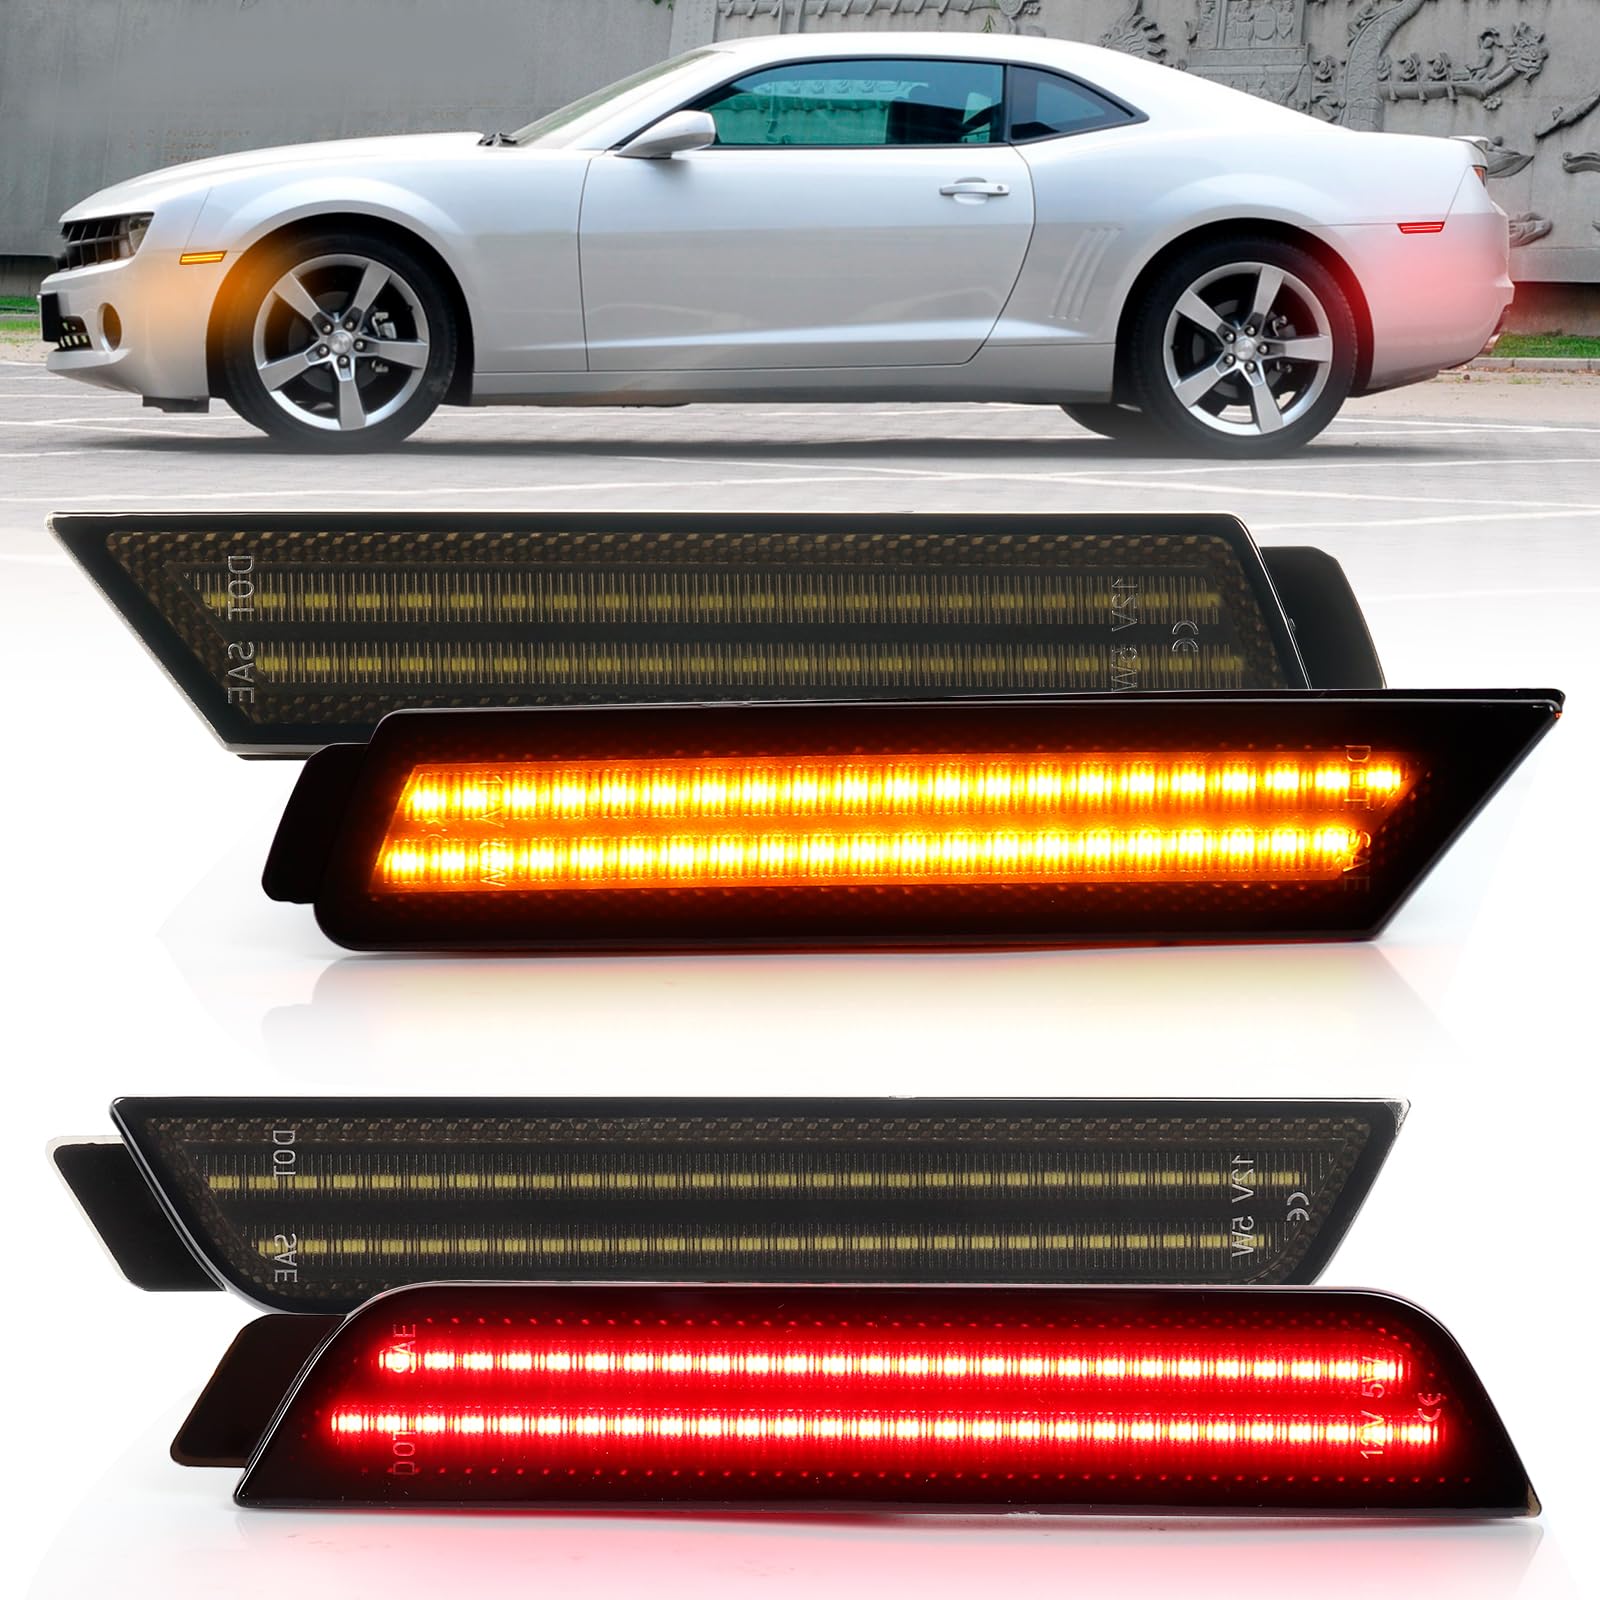 Smoked Lens Full LED Side Marker Lights for Chevy Camaro 2010 2011 2012 2013 2014 2015, Front Amber Red Rear Bumper Fender Turn Signal Reflectors, Pack of 4 von FetonAuto